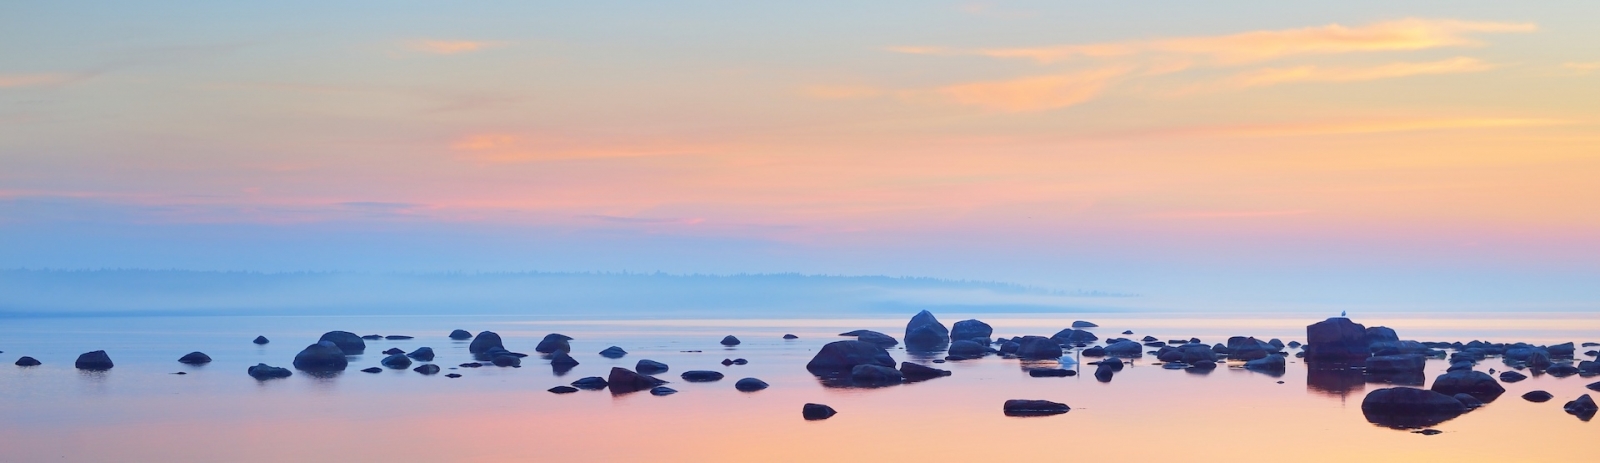 Rocks at the coast of Kasmu (captain's village) at sunset. Estonia, Baltic sea. Clear blue sky, pink clouds. Panoramic view. Travel destinations, vacations, eco tourism